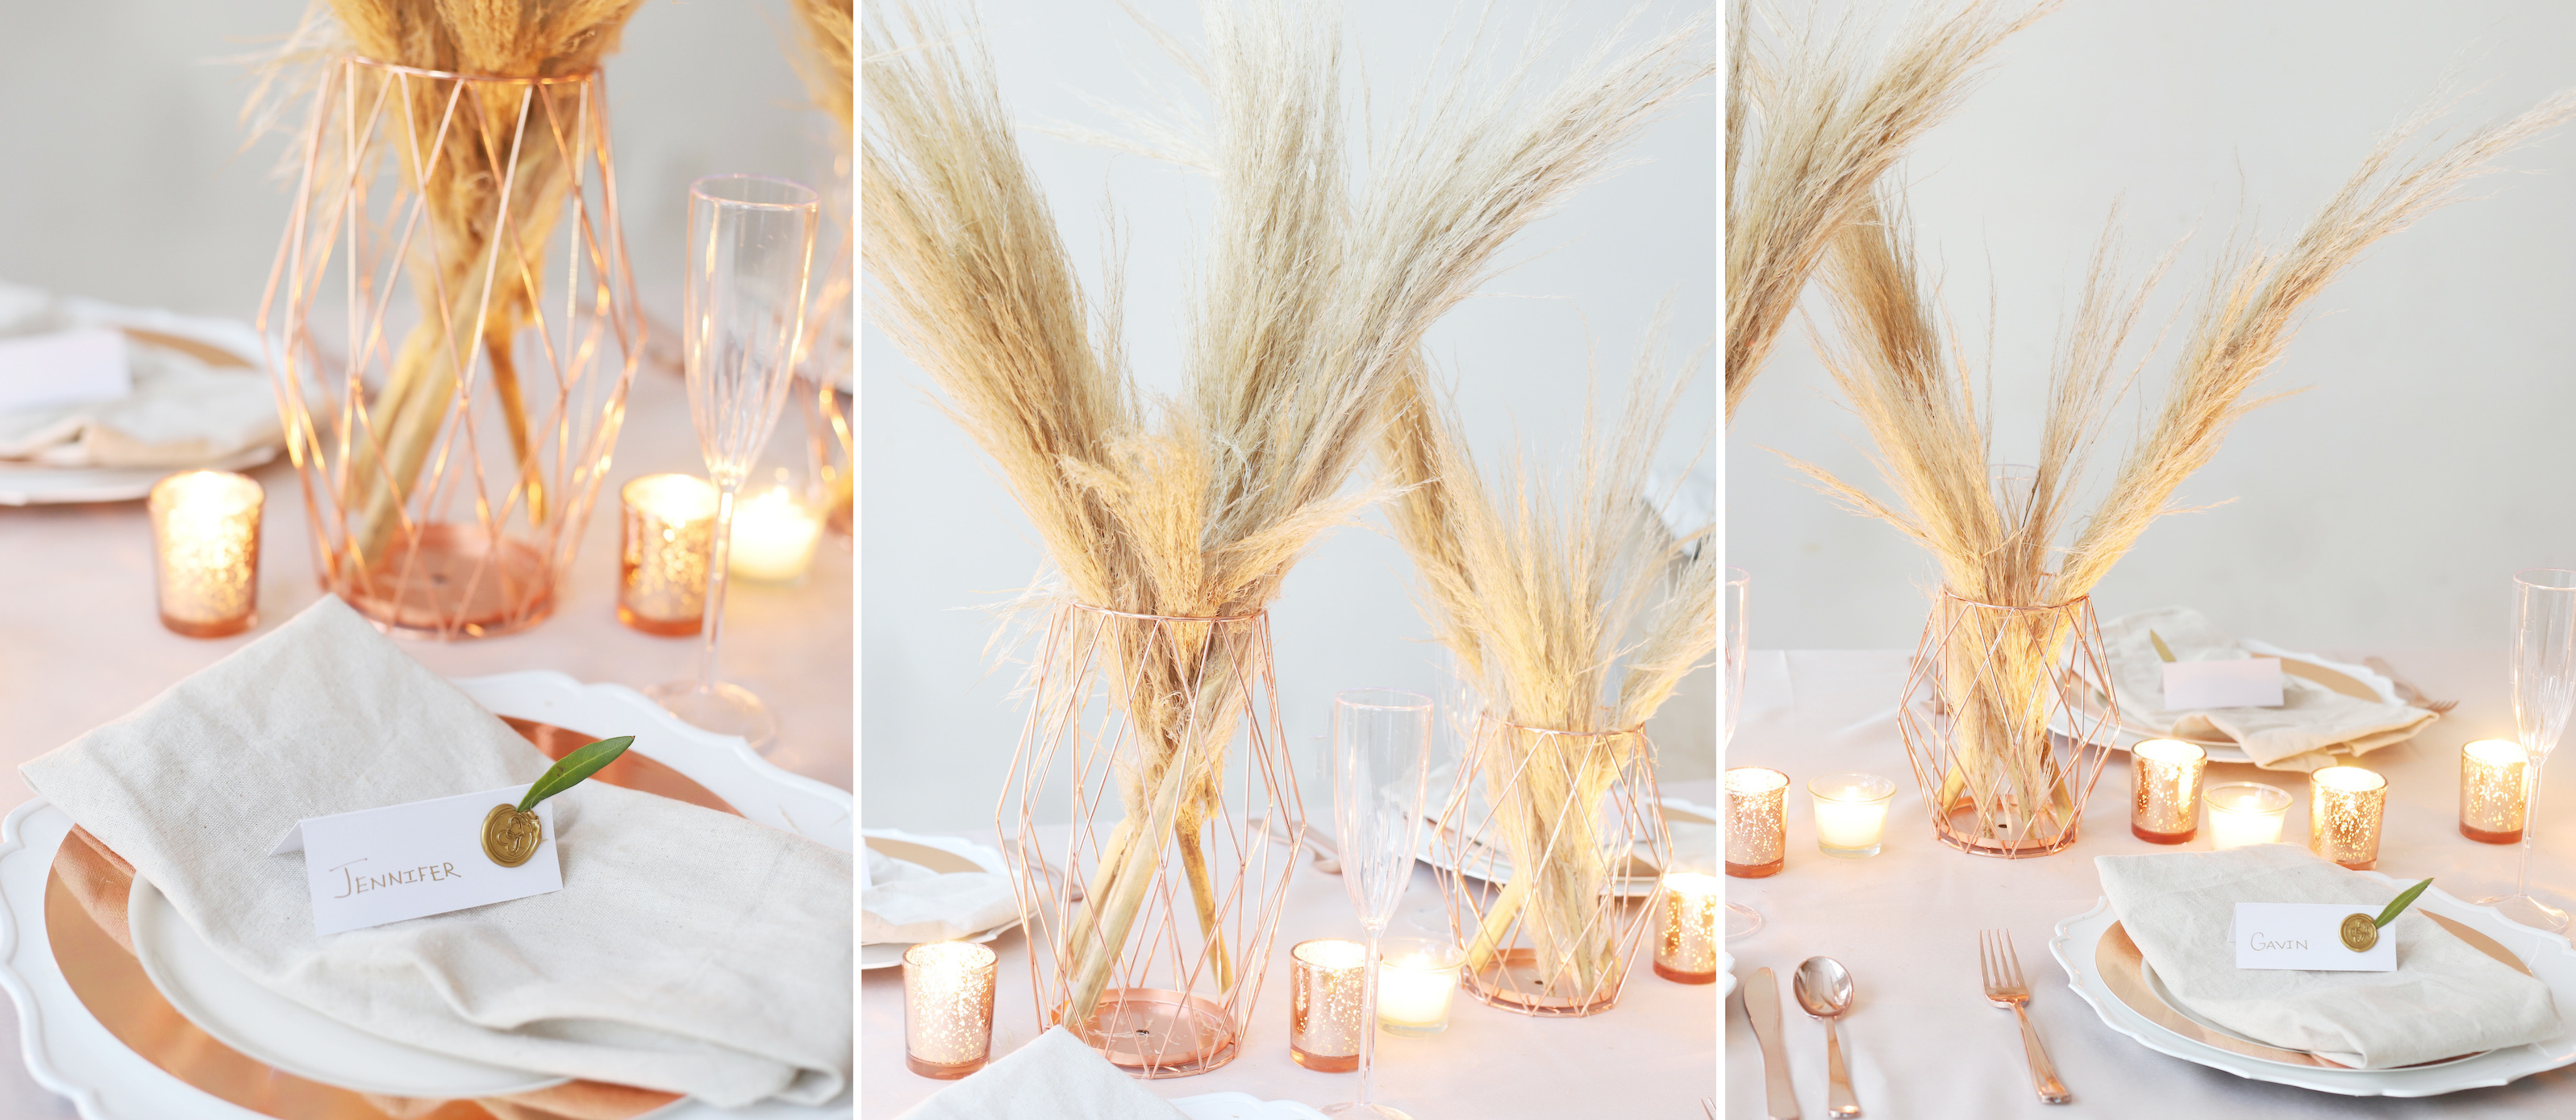 Wedding Decor, Candles, Lights, Vases & Accents